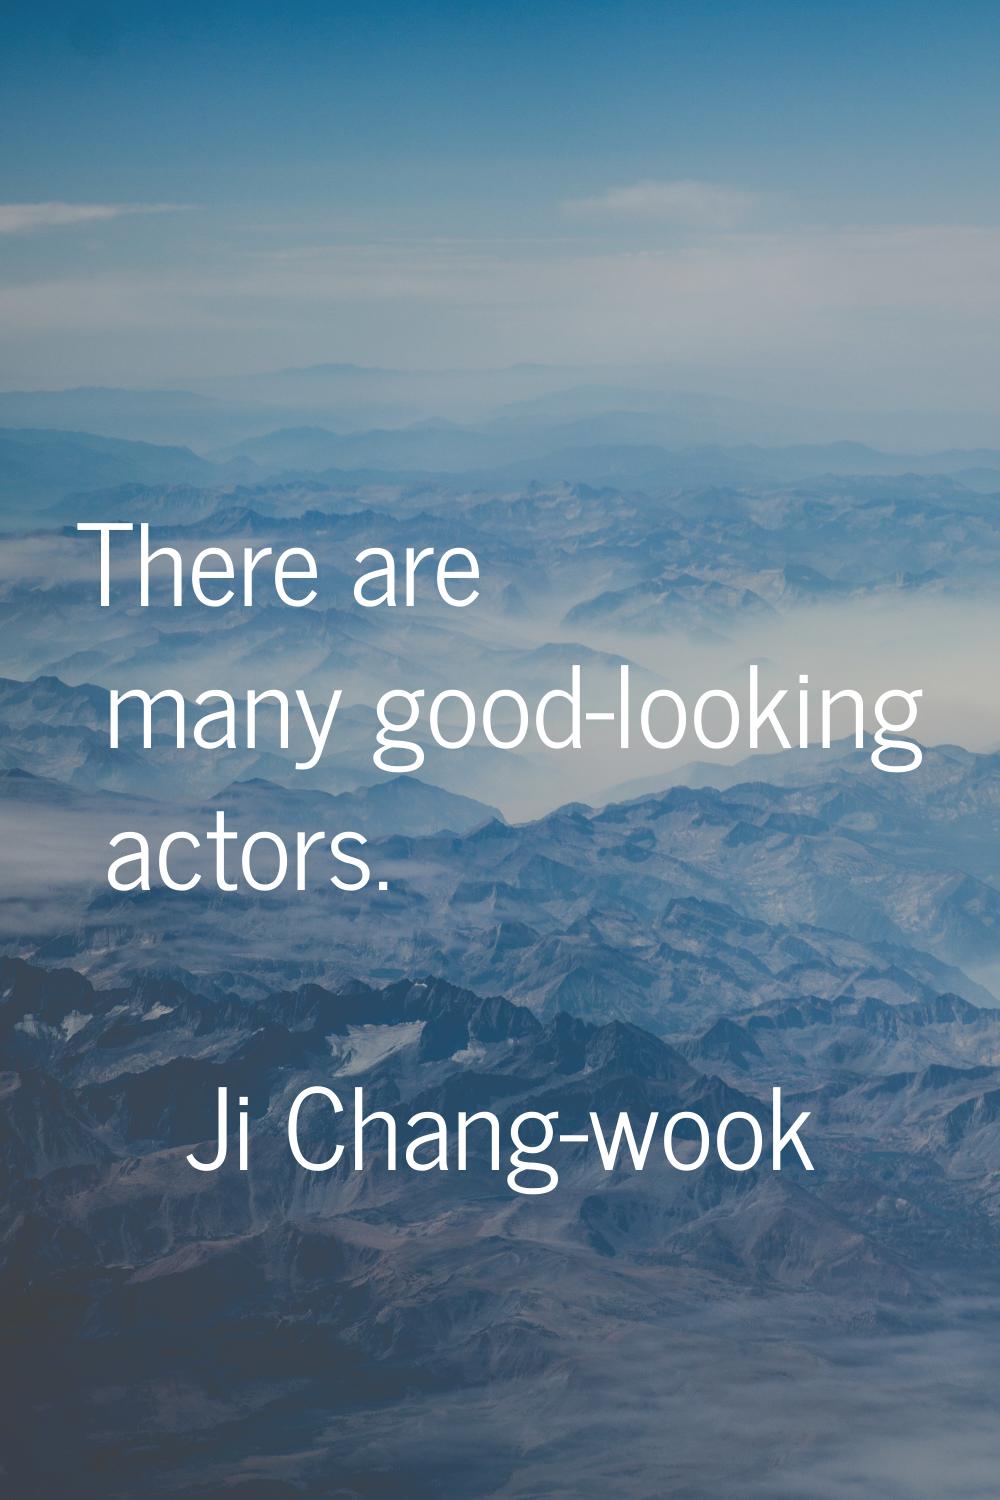 There are many good-looking actors.